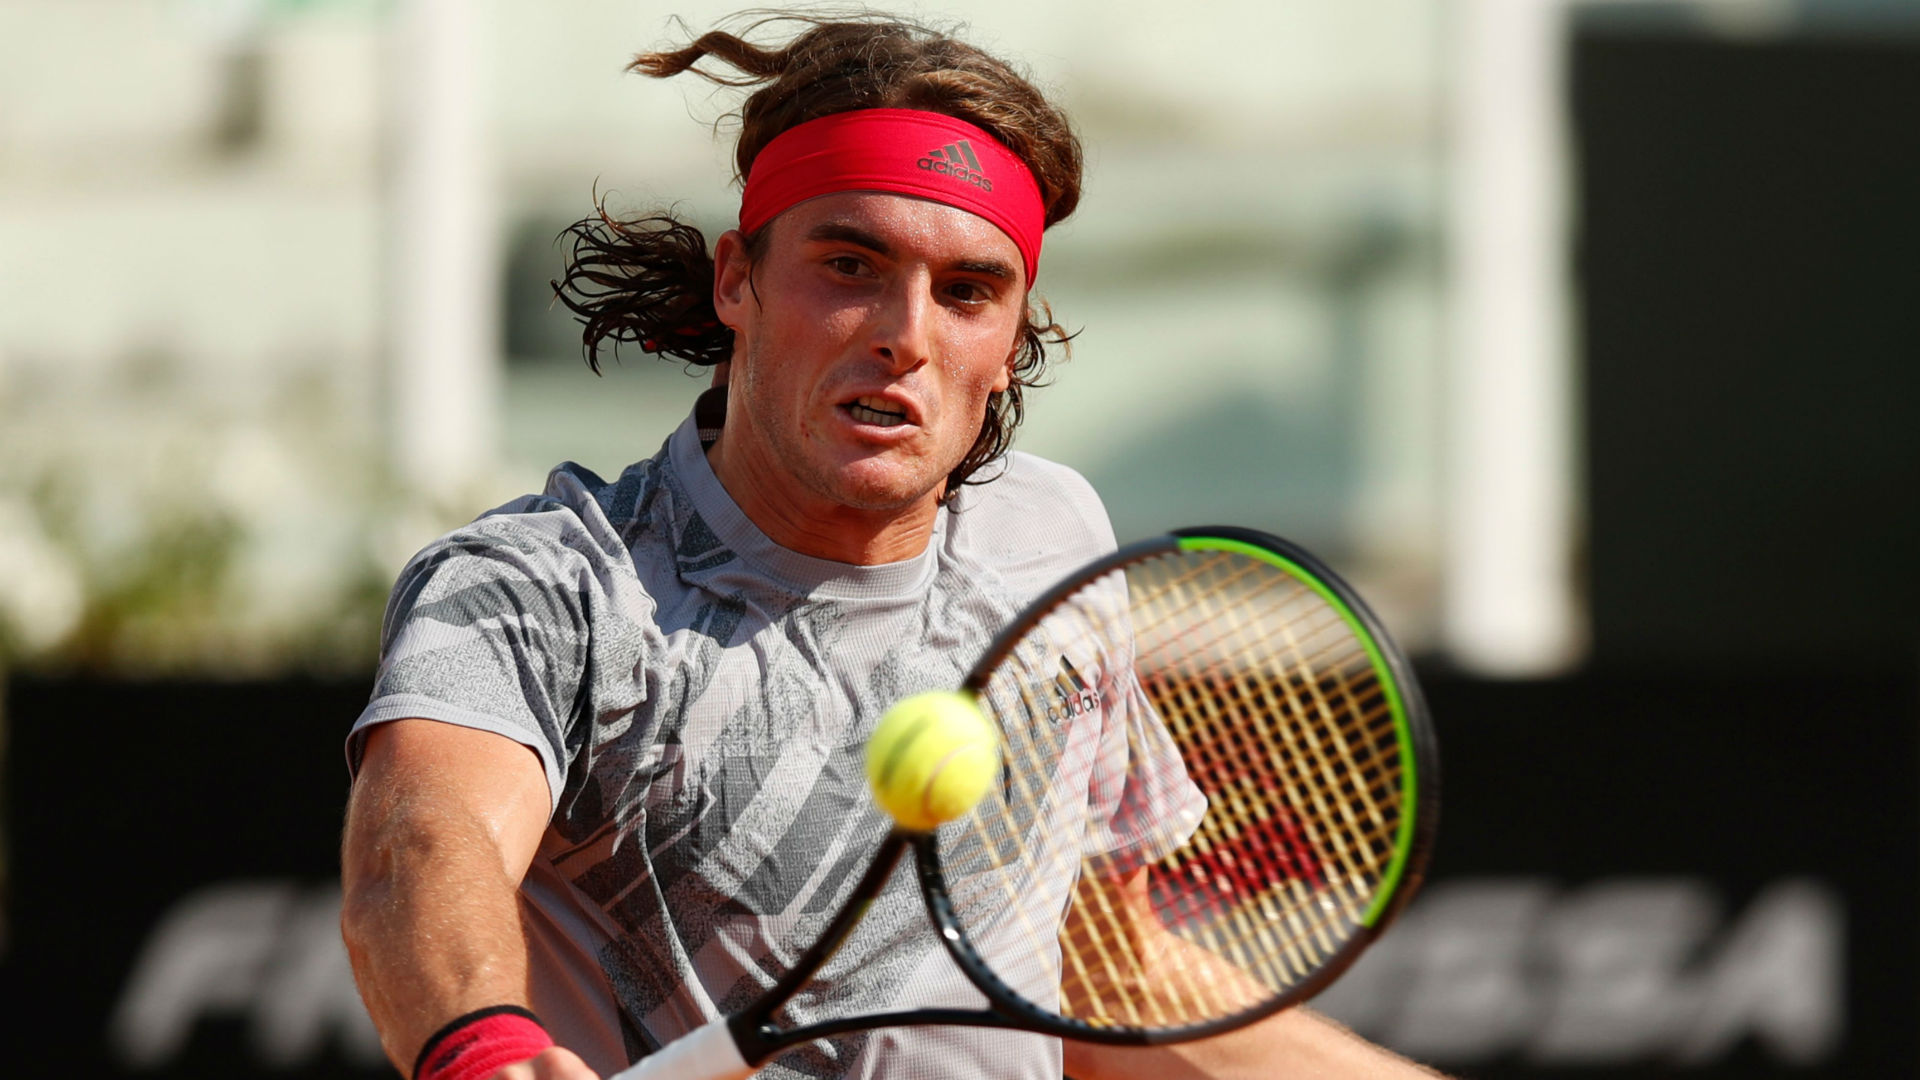 Daniel Evans proved no match for Stefanos Tsitsipas on Wednesday, as the world number six eased into the second round at the Hamburg Open.